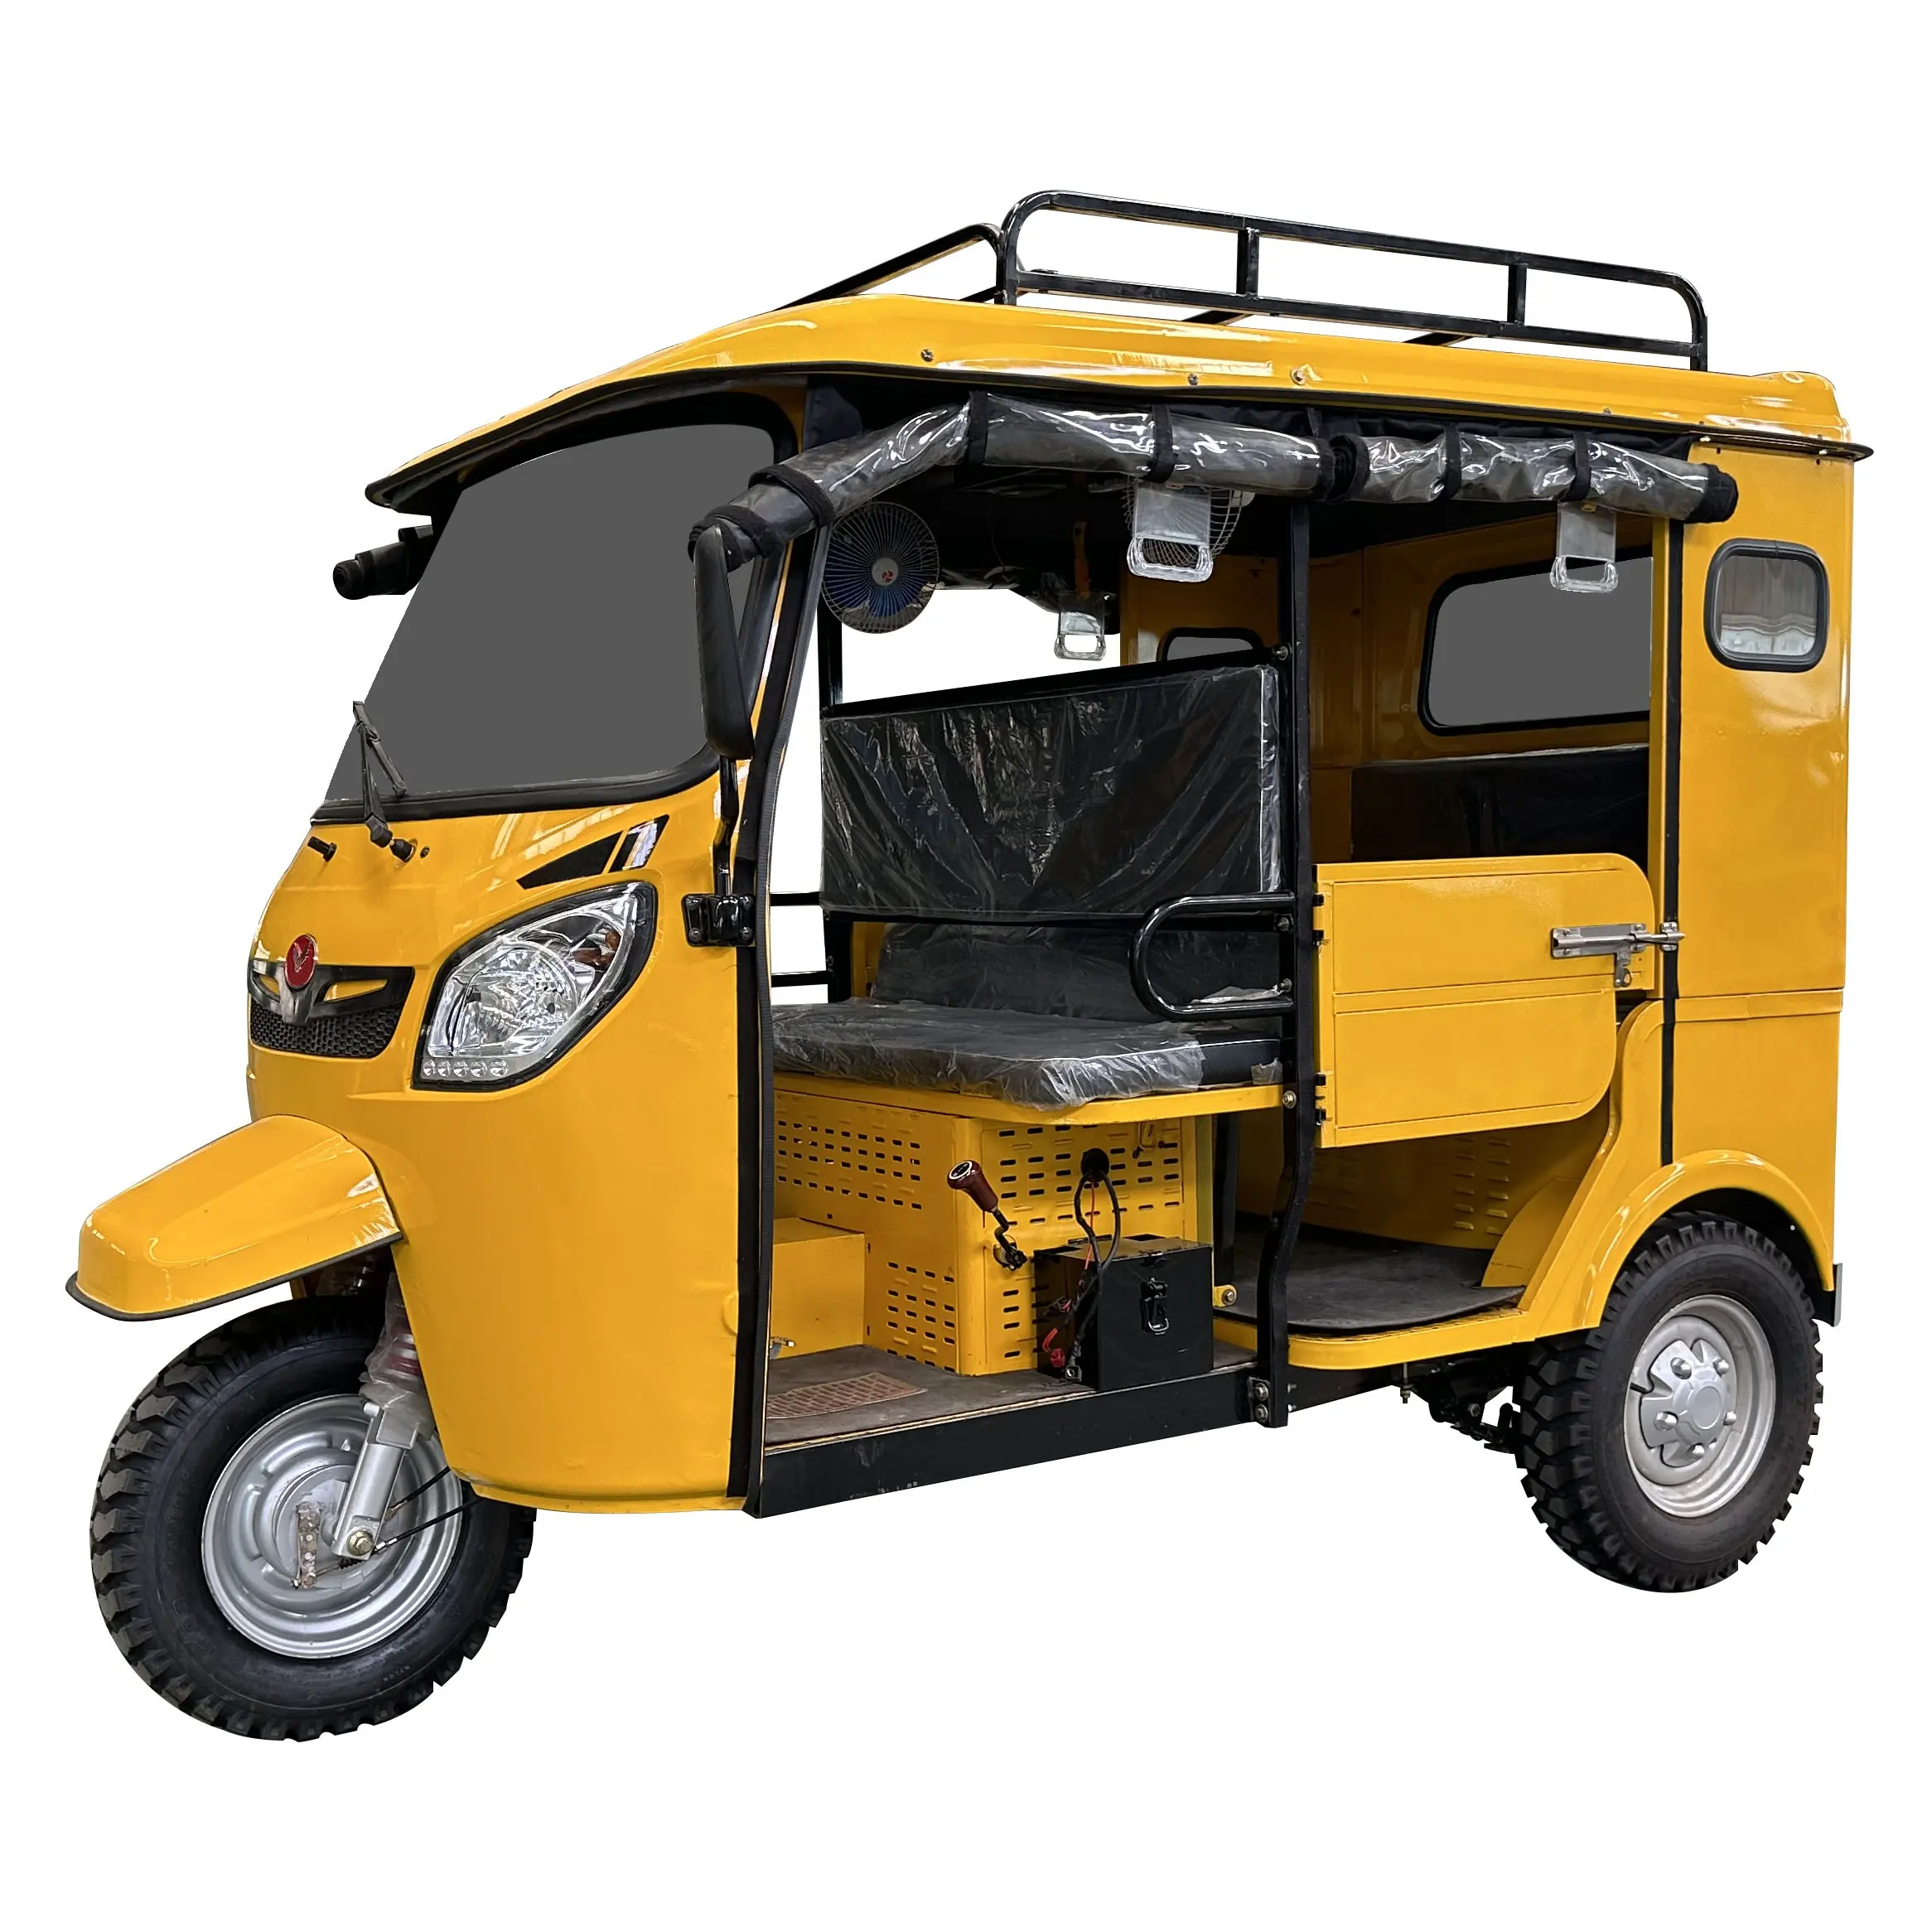 200CC Water Cooled Engine Pedicab Petrol Rickshaw Taxi Motor Tricycle For Passengers / Cargo